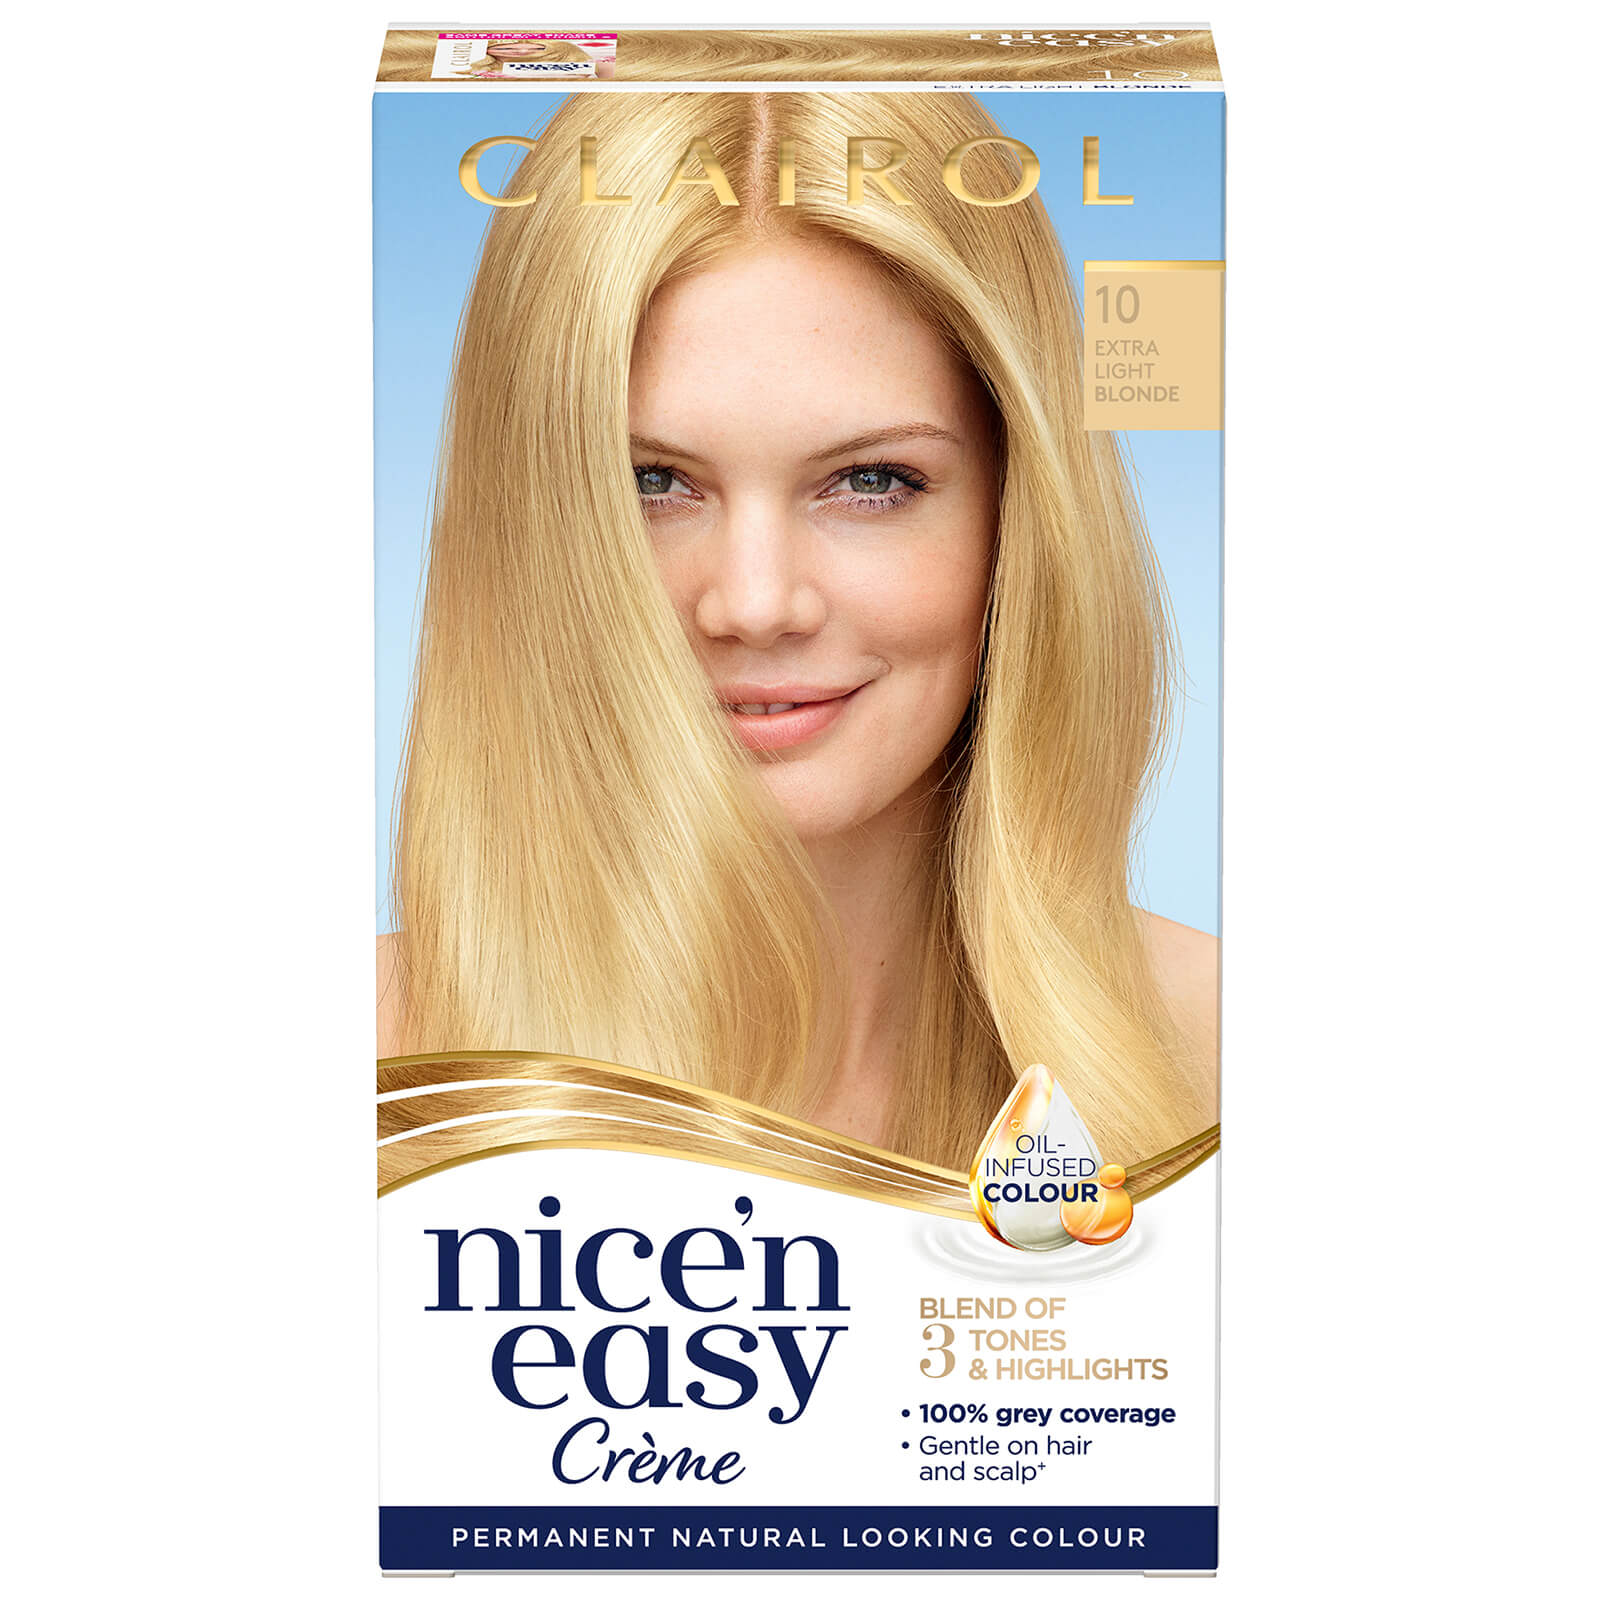 Clairol Nice' n Easy Crème Natural Looking Oil Infused Permanent Hair Dye 177ml (Various Shades) - 10 Extra Light Blonde